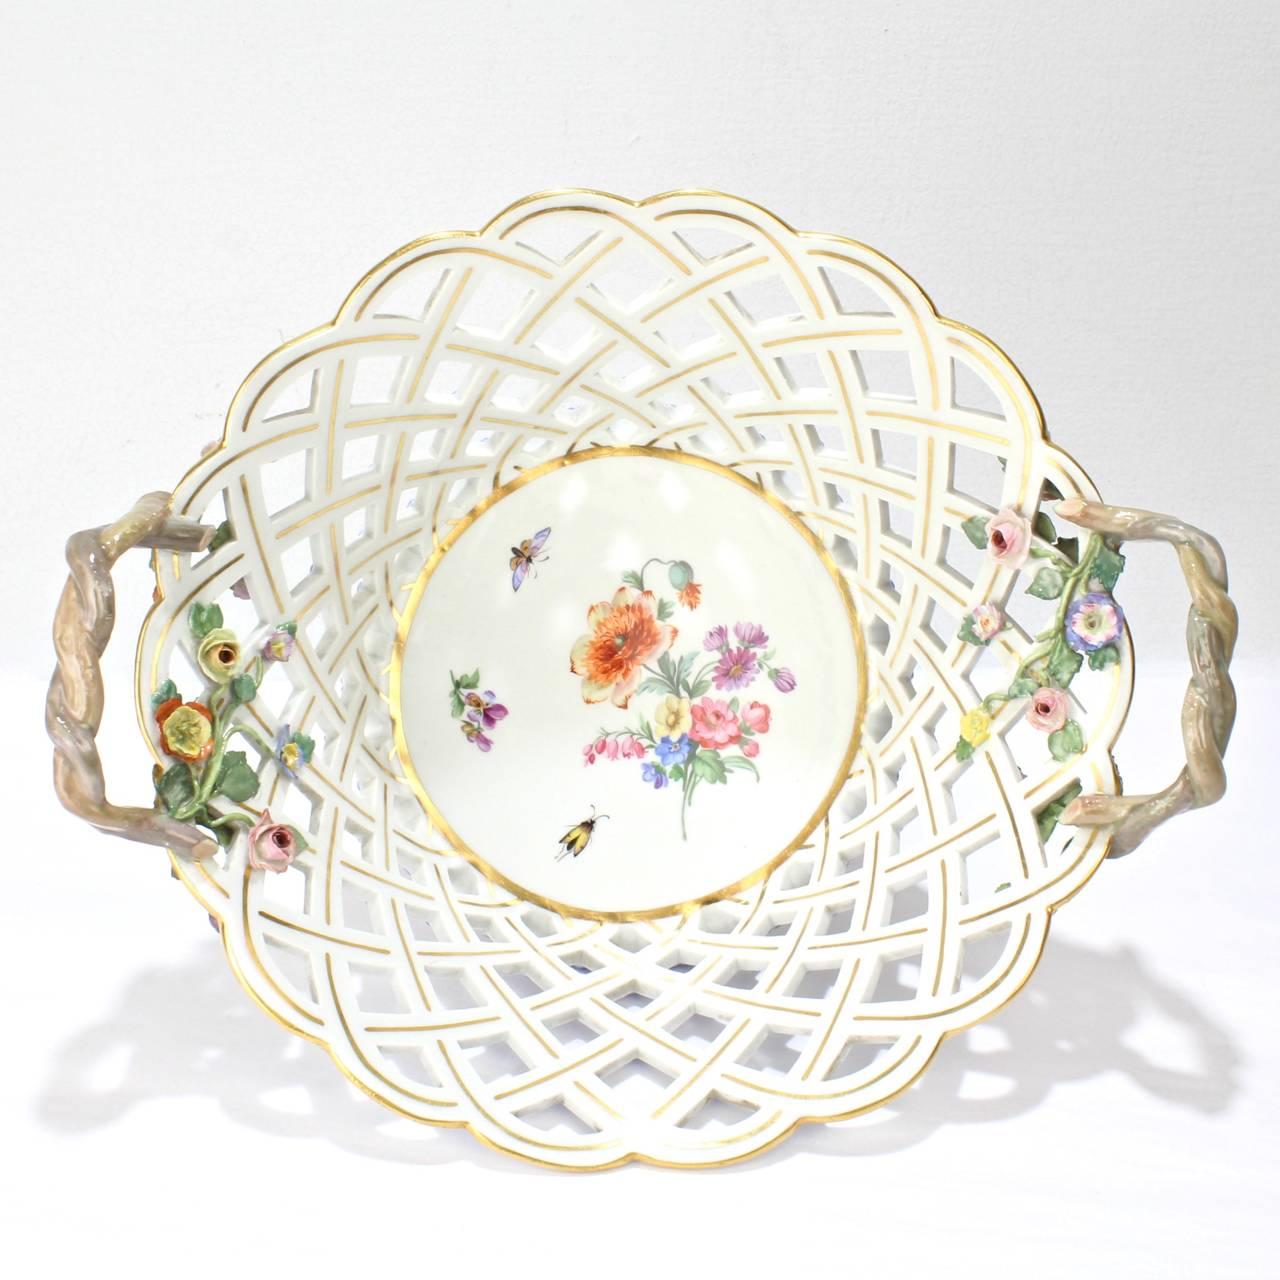 A fine, antique Meissen porcelain basket with openwork, twig handles, and flower encrusted vines, and enamel Deutsche Blumen decoration. A rare form!

Base marked with a blue underglaze crossed swords factory mark, an incised 62, and an impressed